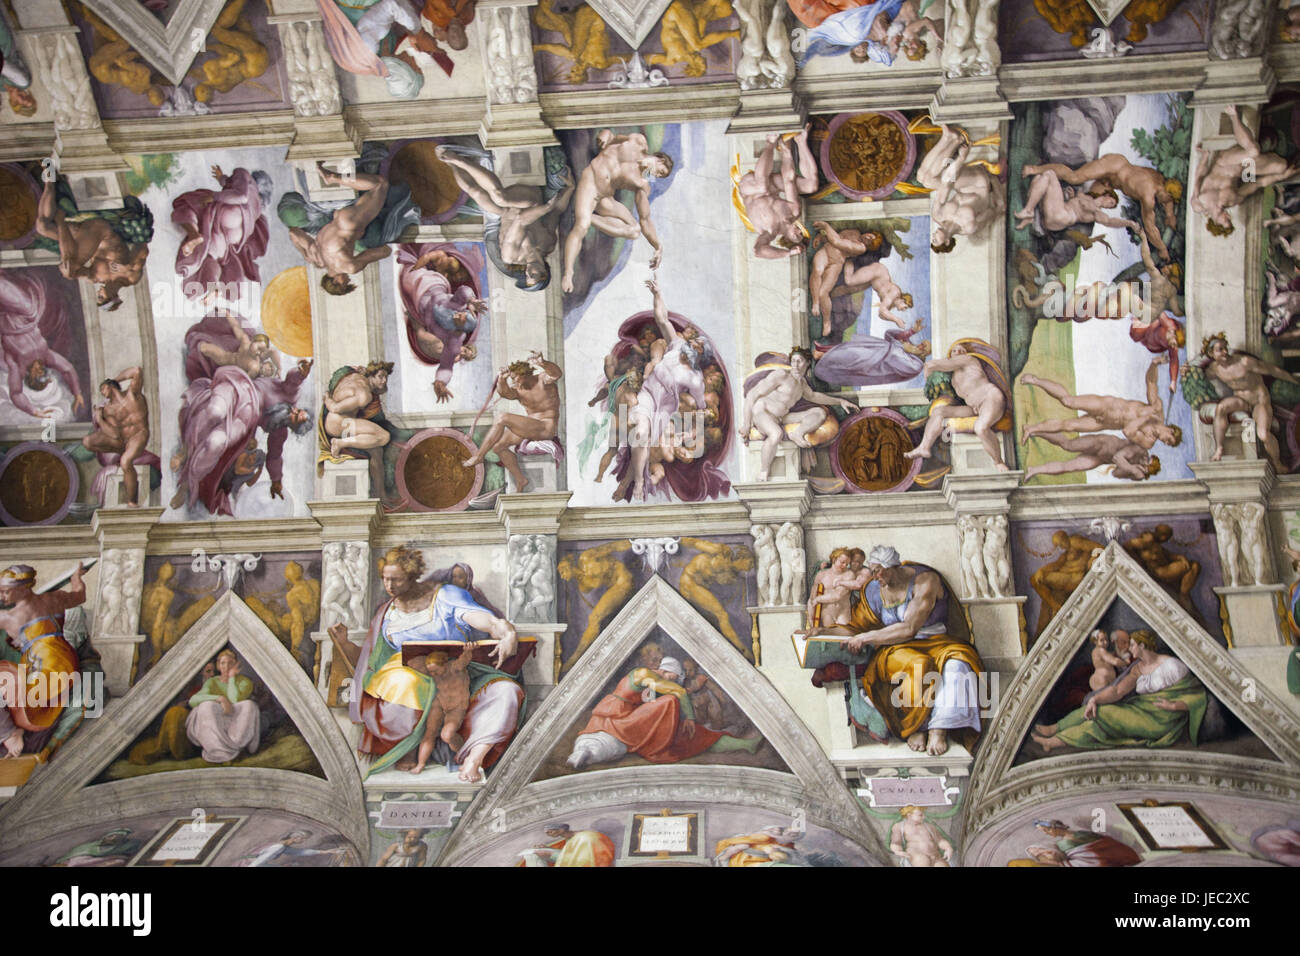 Italy, Rome, Vatican, Vatican broad museums, Sistine band, Michelangelo frescoes, representation, 'The creation of the world' and 'The Fall of Man', Stock Photo